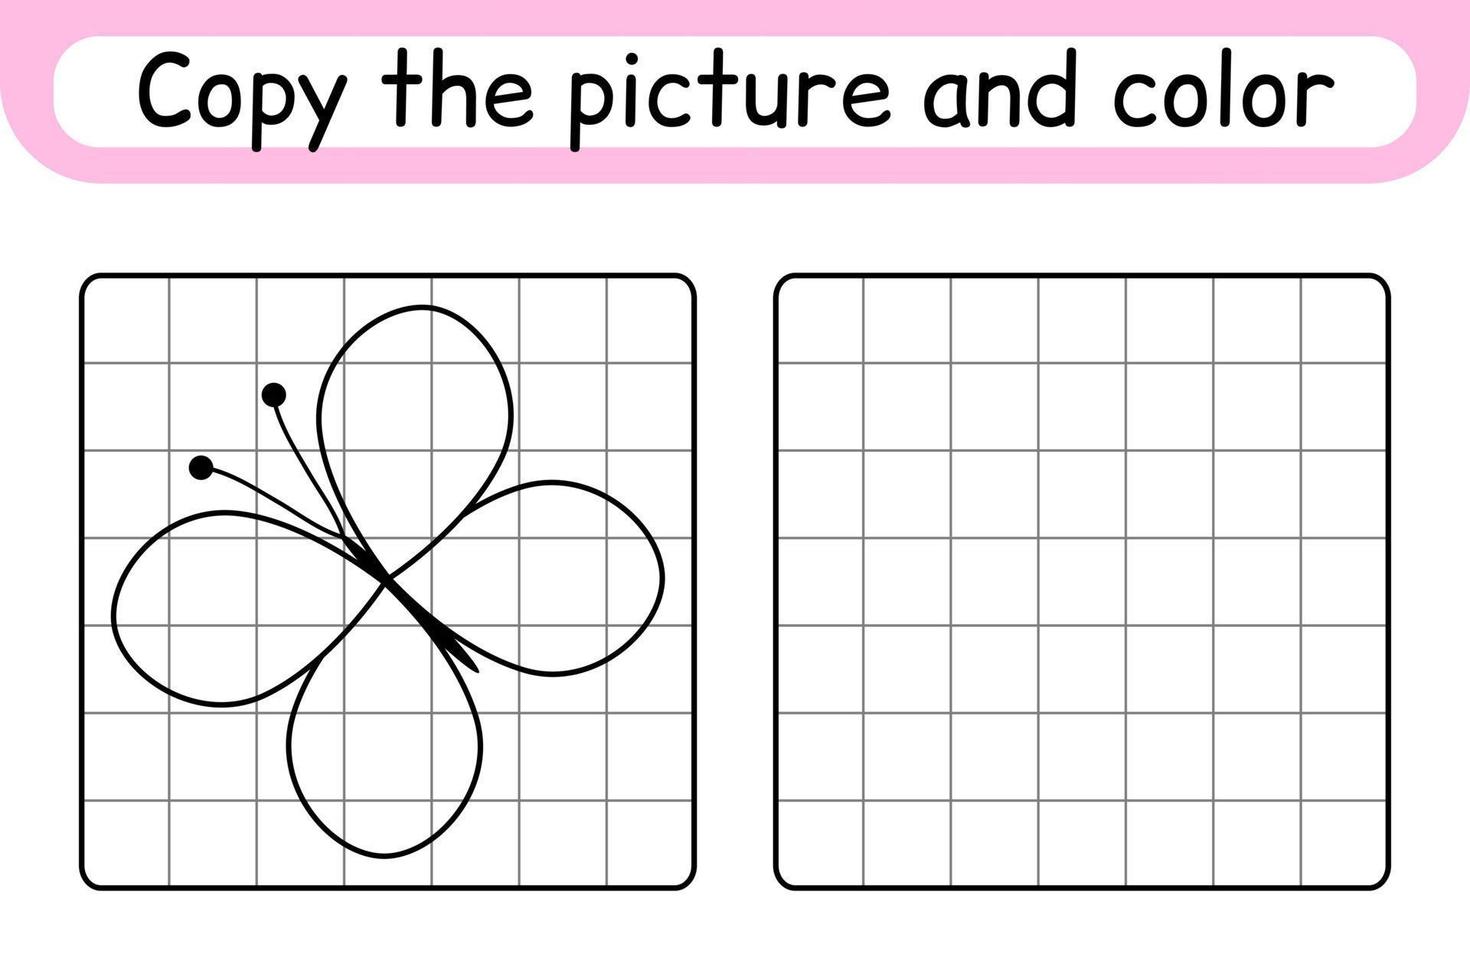 Copy the picture and color butterfly. Complete the picture. Finish the image. Coloring book. Educational drawing exercise game for children vector